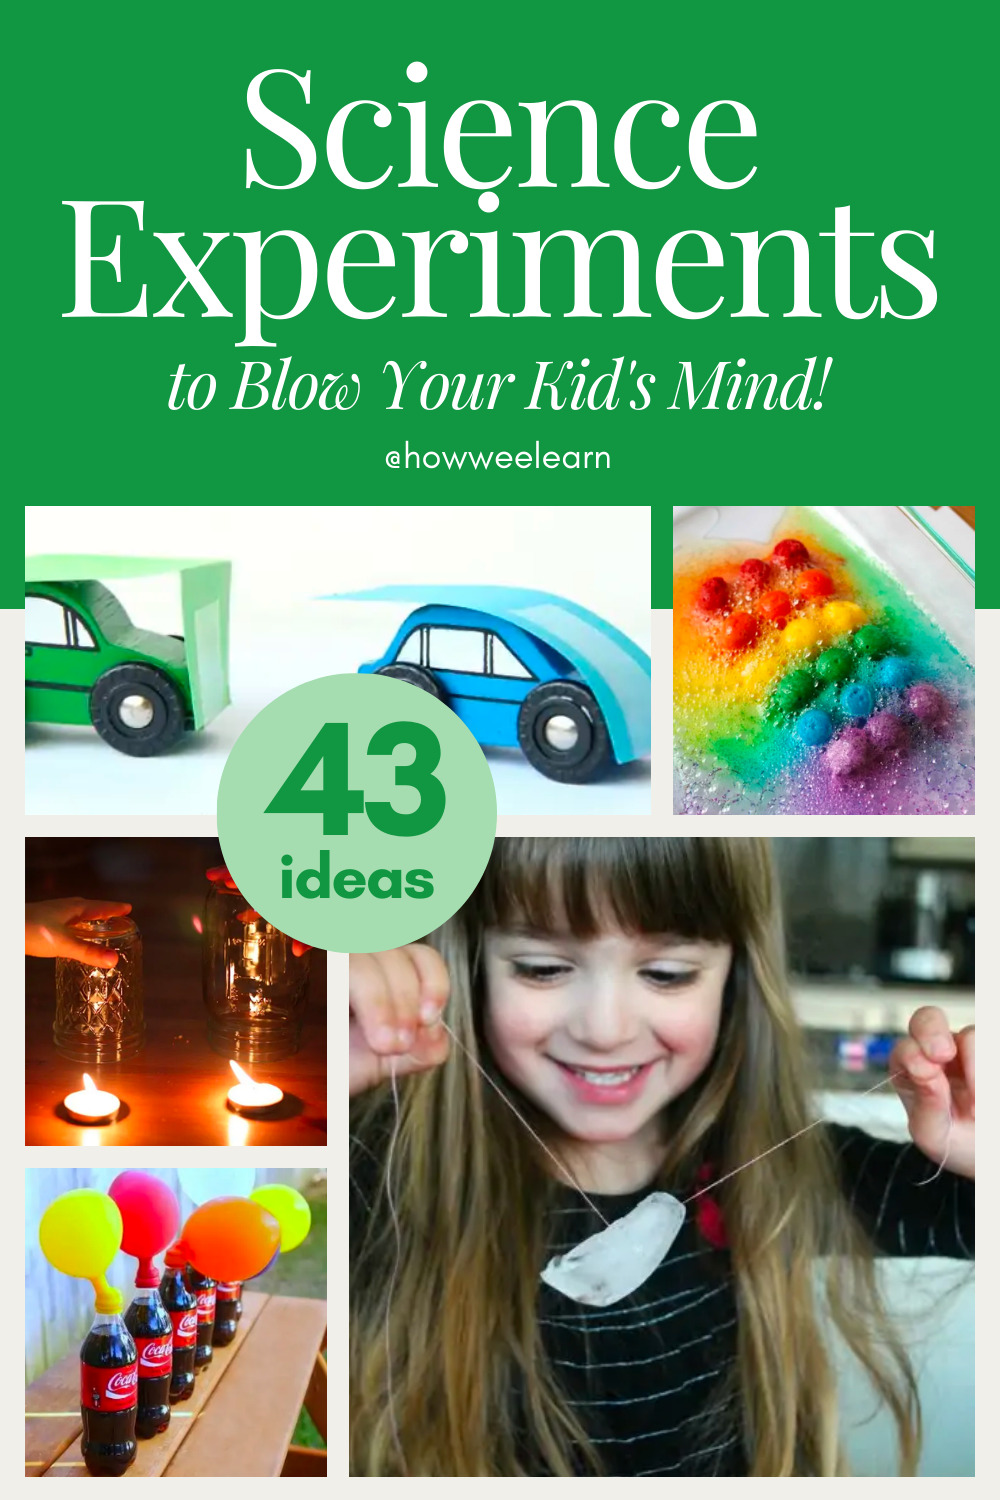 Simple but AMAZING science experiments for kids! These are awesome and easy science projects. #science #experiments #preschool #kids